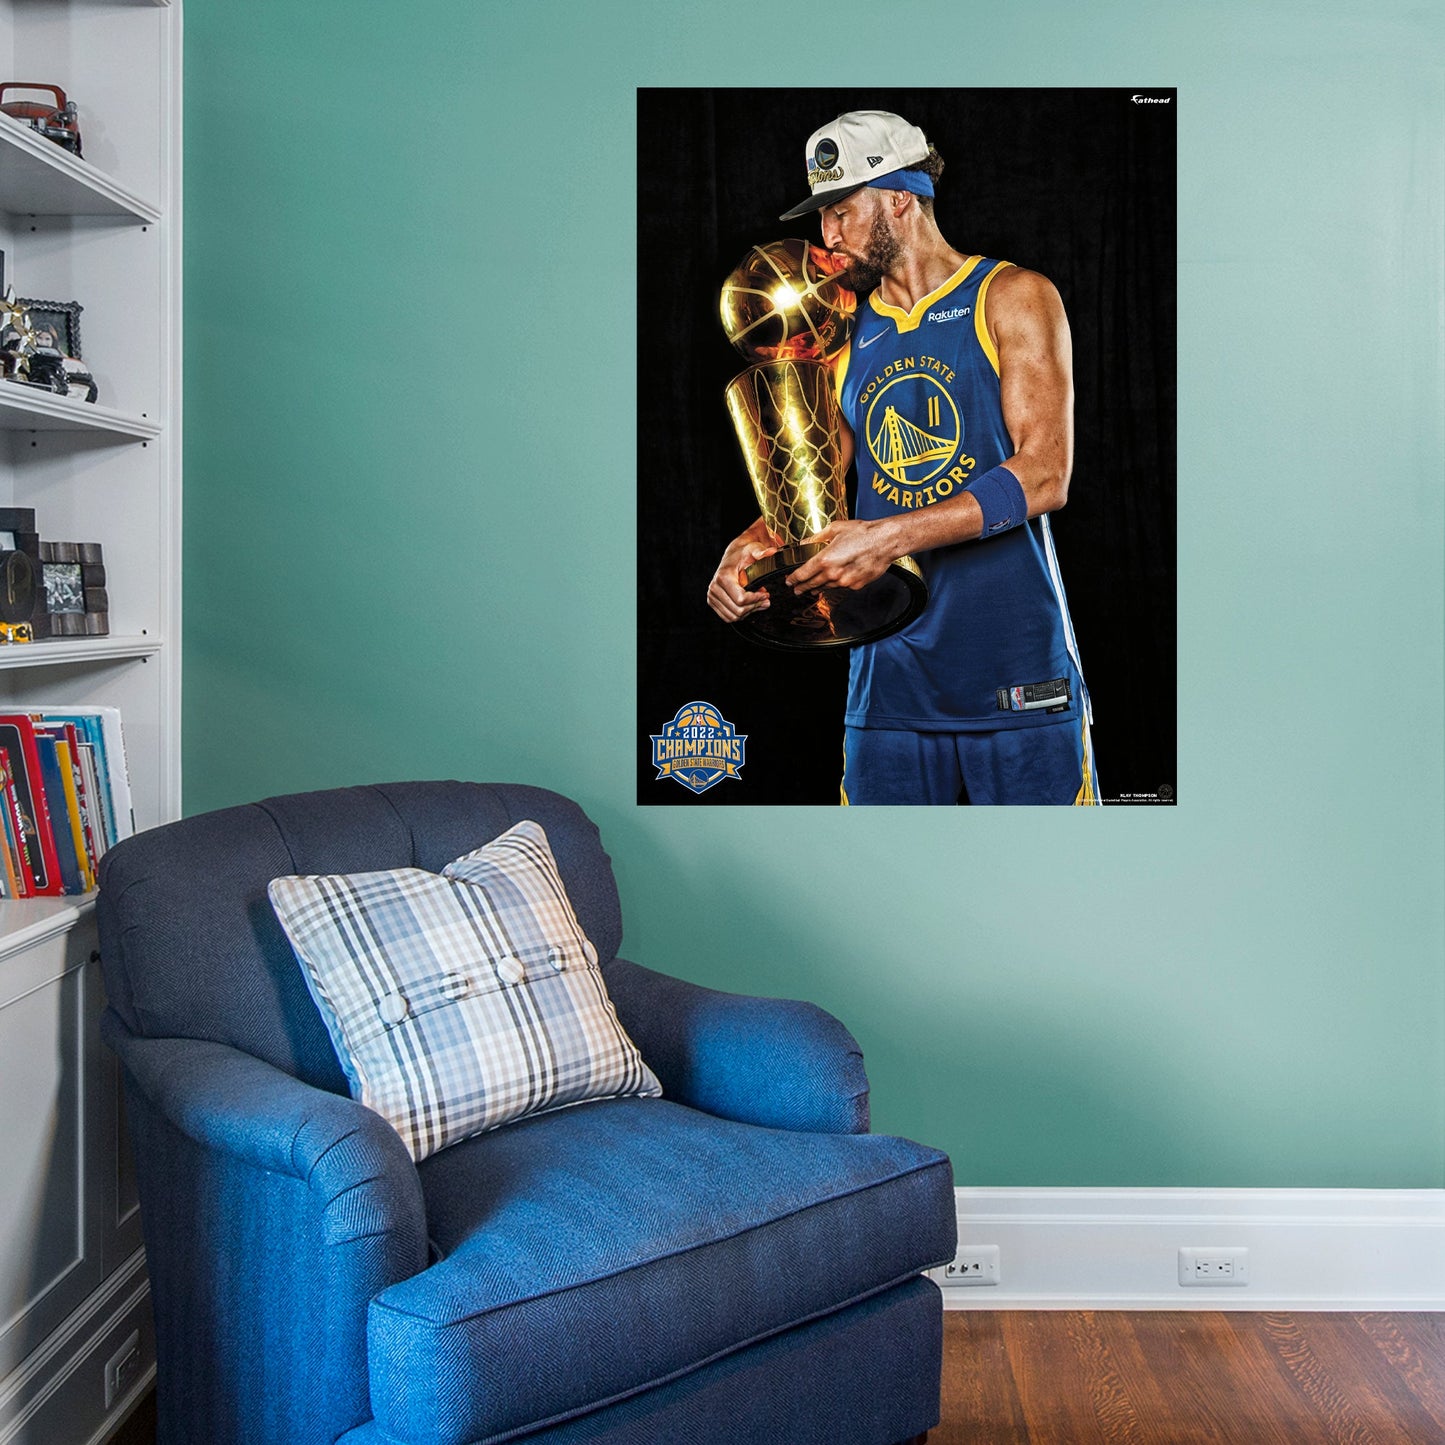 Golden State Warriors: Klay Thompson 2022 Champion Trophy Poster - Officially Licensed NBA Removable Adhesive Decal